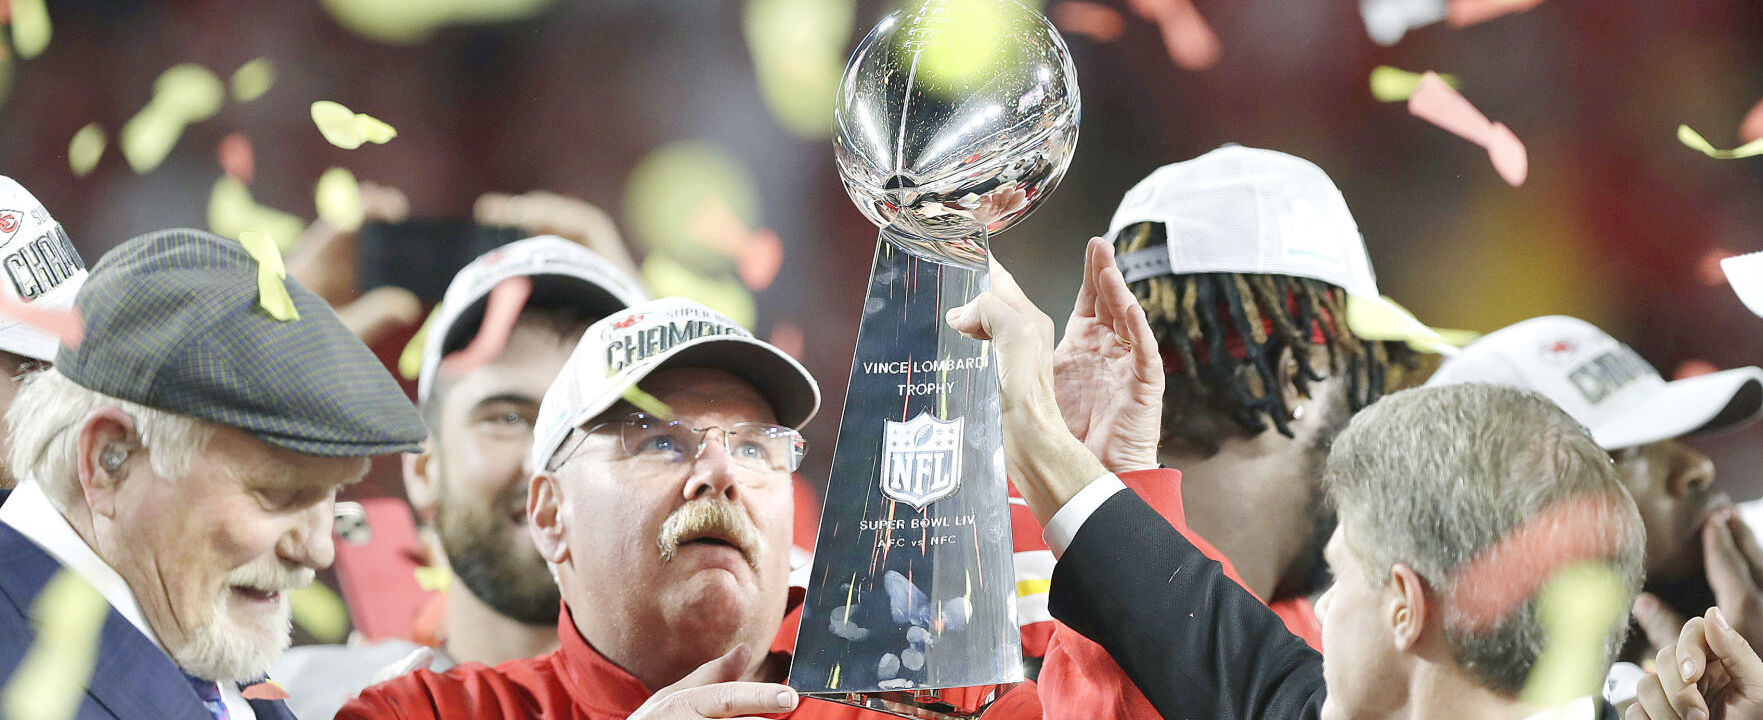 Do you think the Chiefs will repeat as Super Bowl champs?